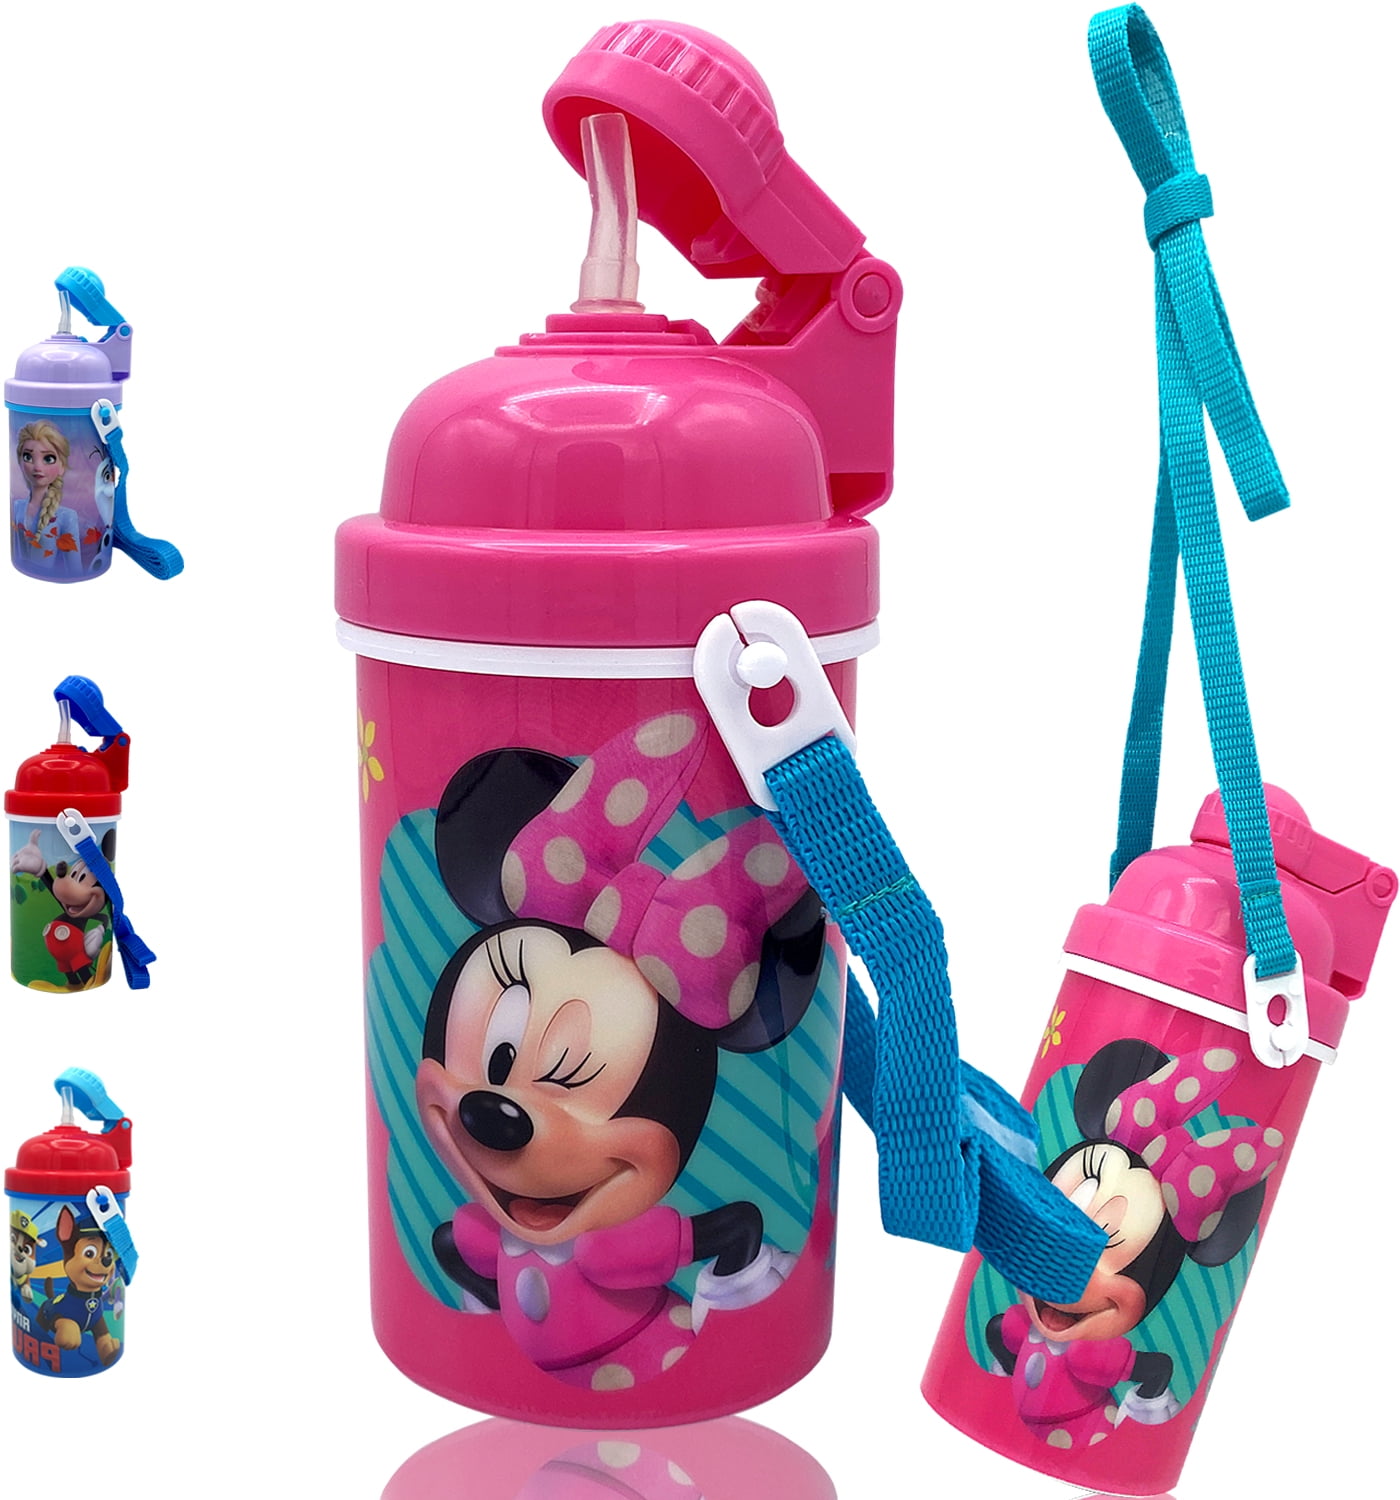 Disney Store Japan Minnie Mouse Water Bottle with Carabiner Strap 20.28 oz